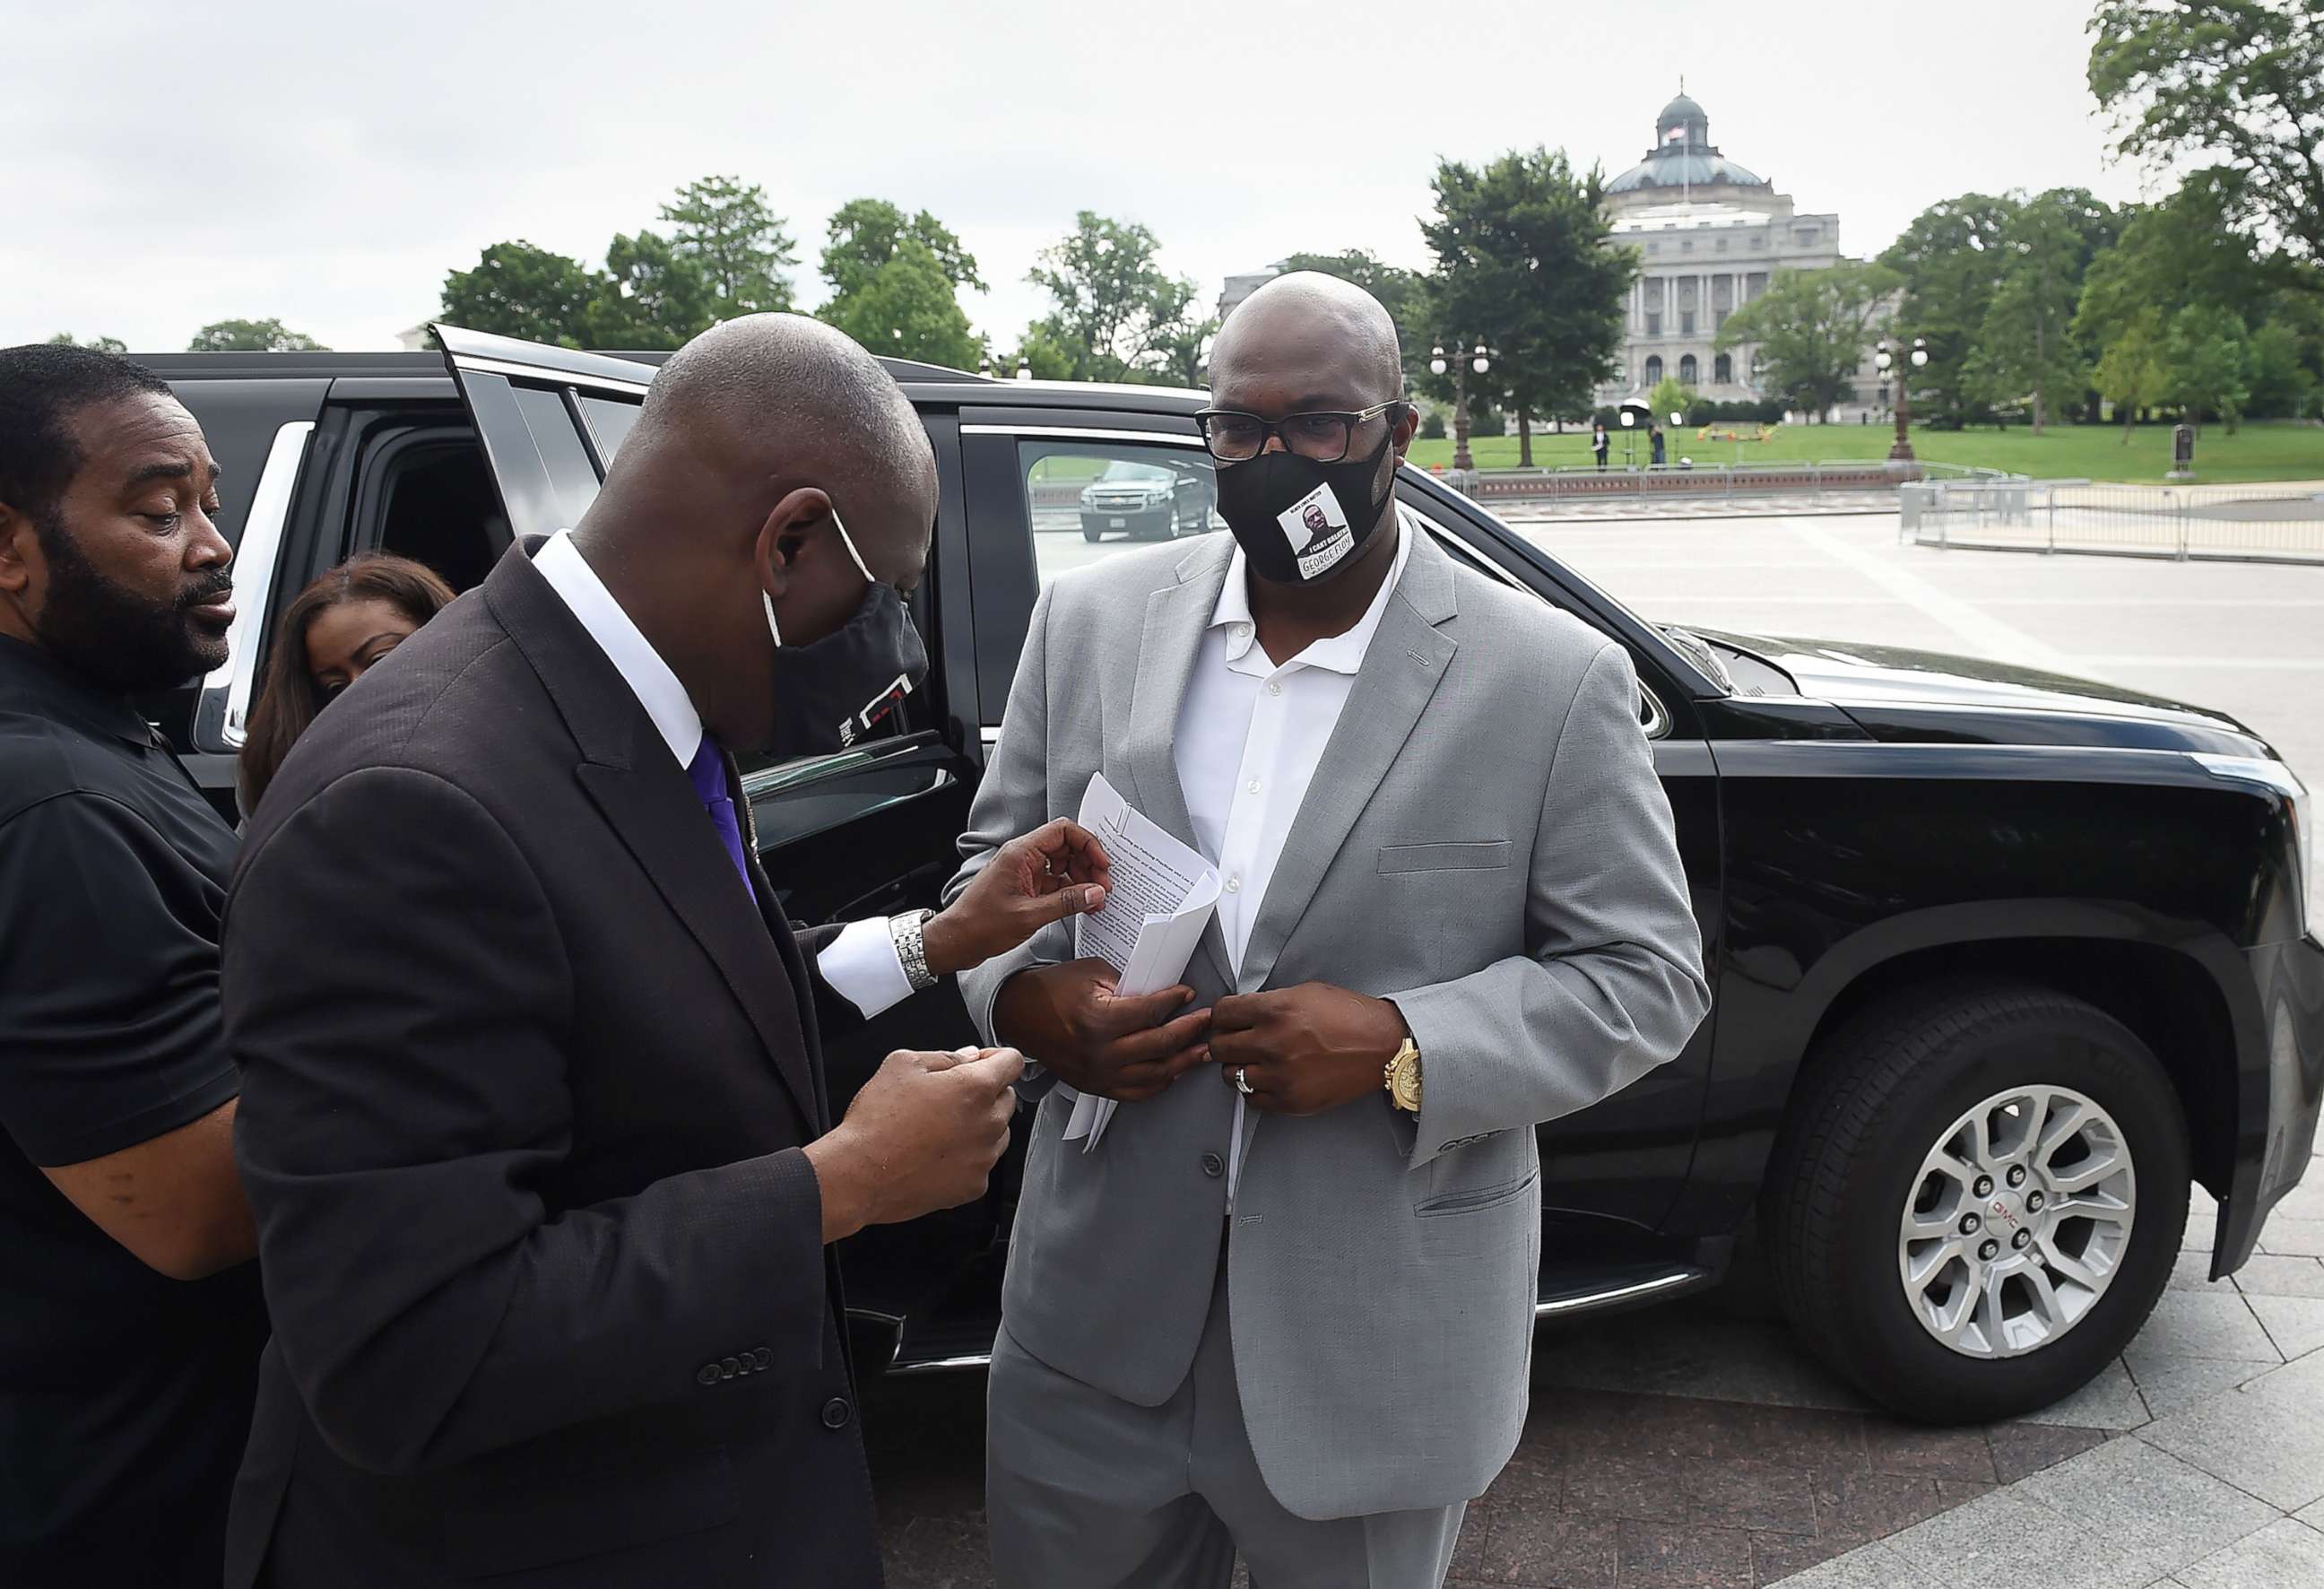 PHOTO: Philonise Floyd, the brother of George Floyd, who was killed by Minneapolis police officers, arrives at the U.S. Capitol to testify at "Oversight Hearing on Policing Practices and Law Enforcement Accountability" in Washington, D.C., June 10, 2020.